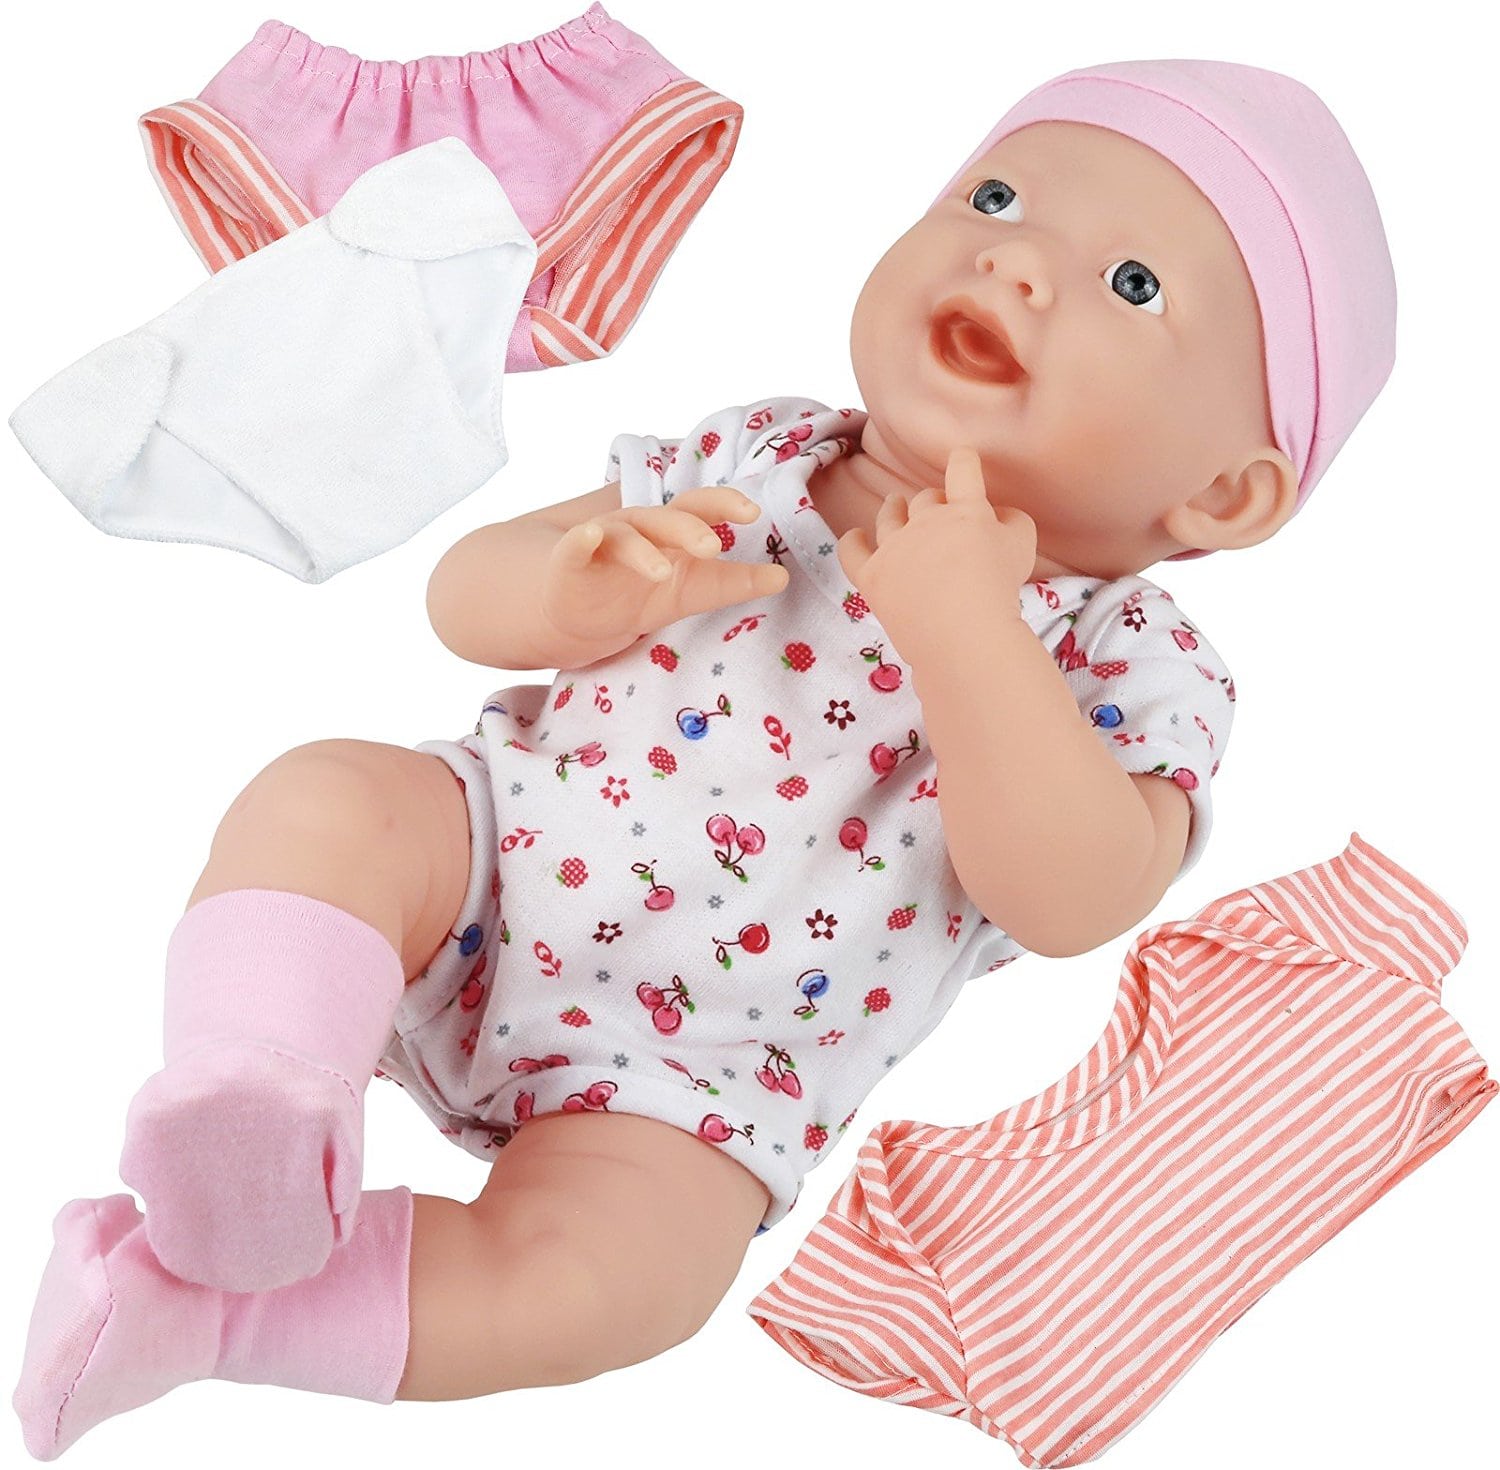 water baby doll outfits